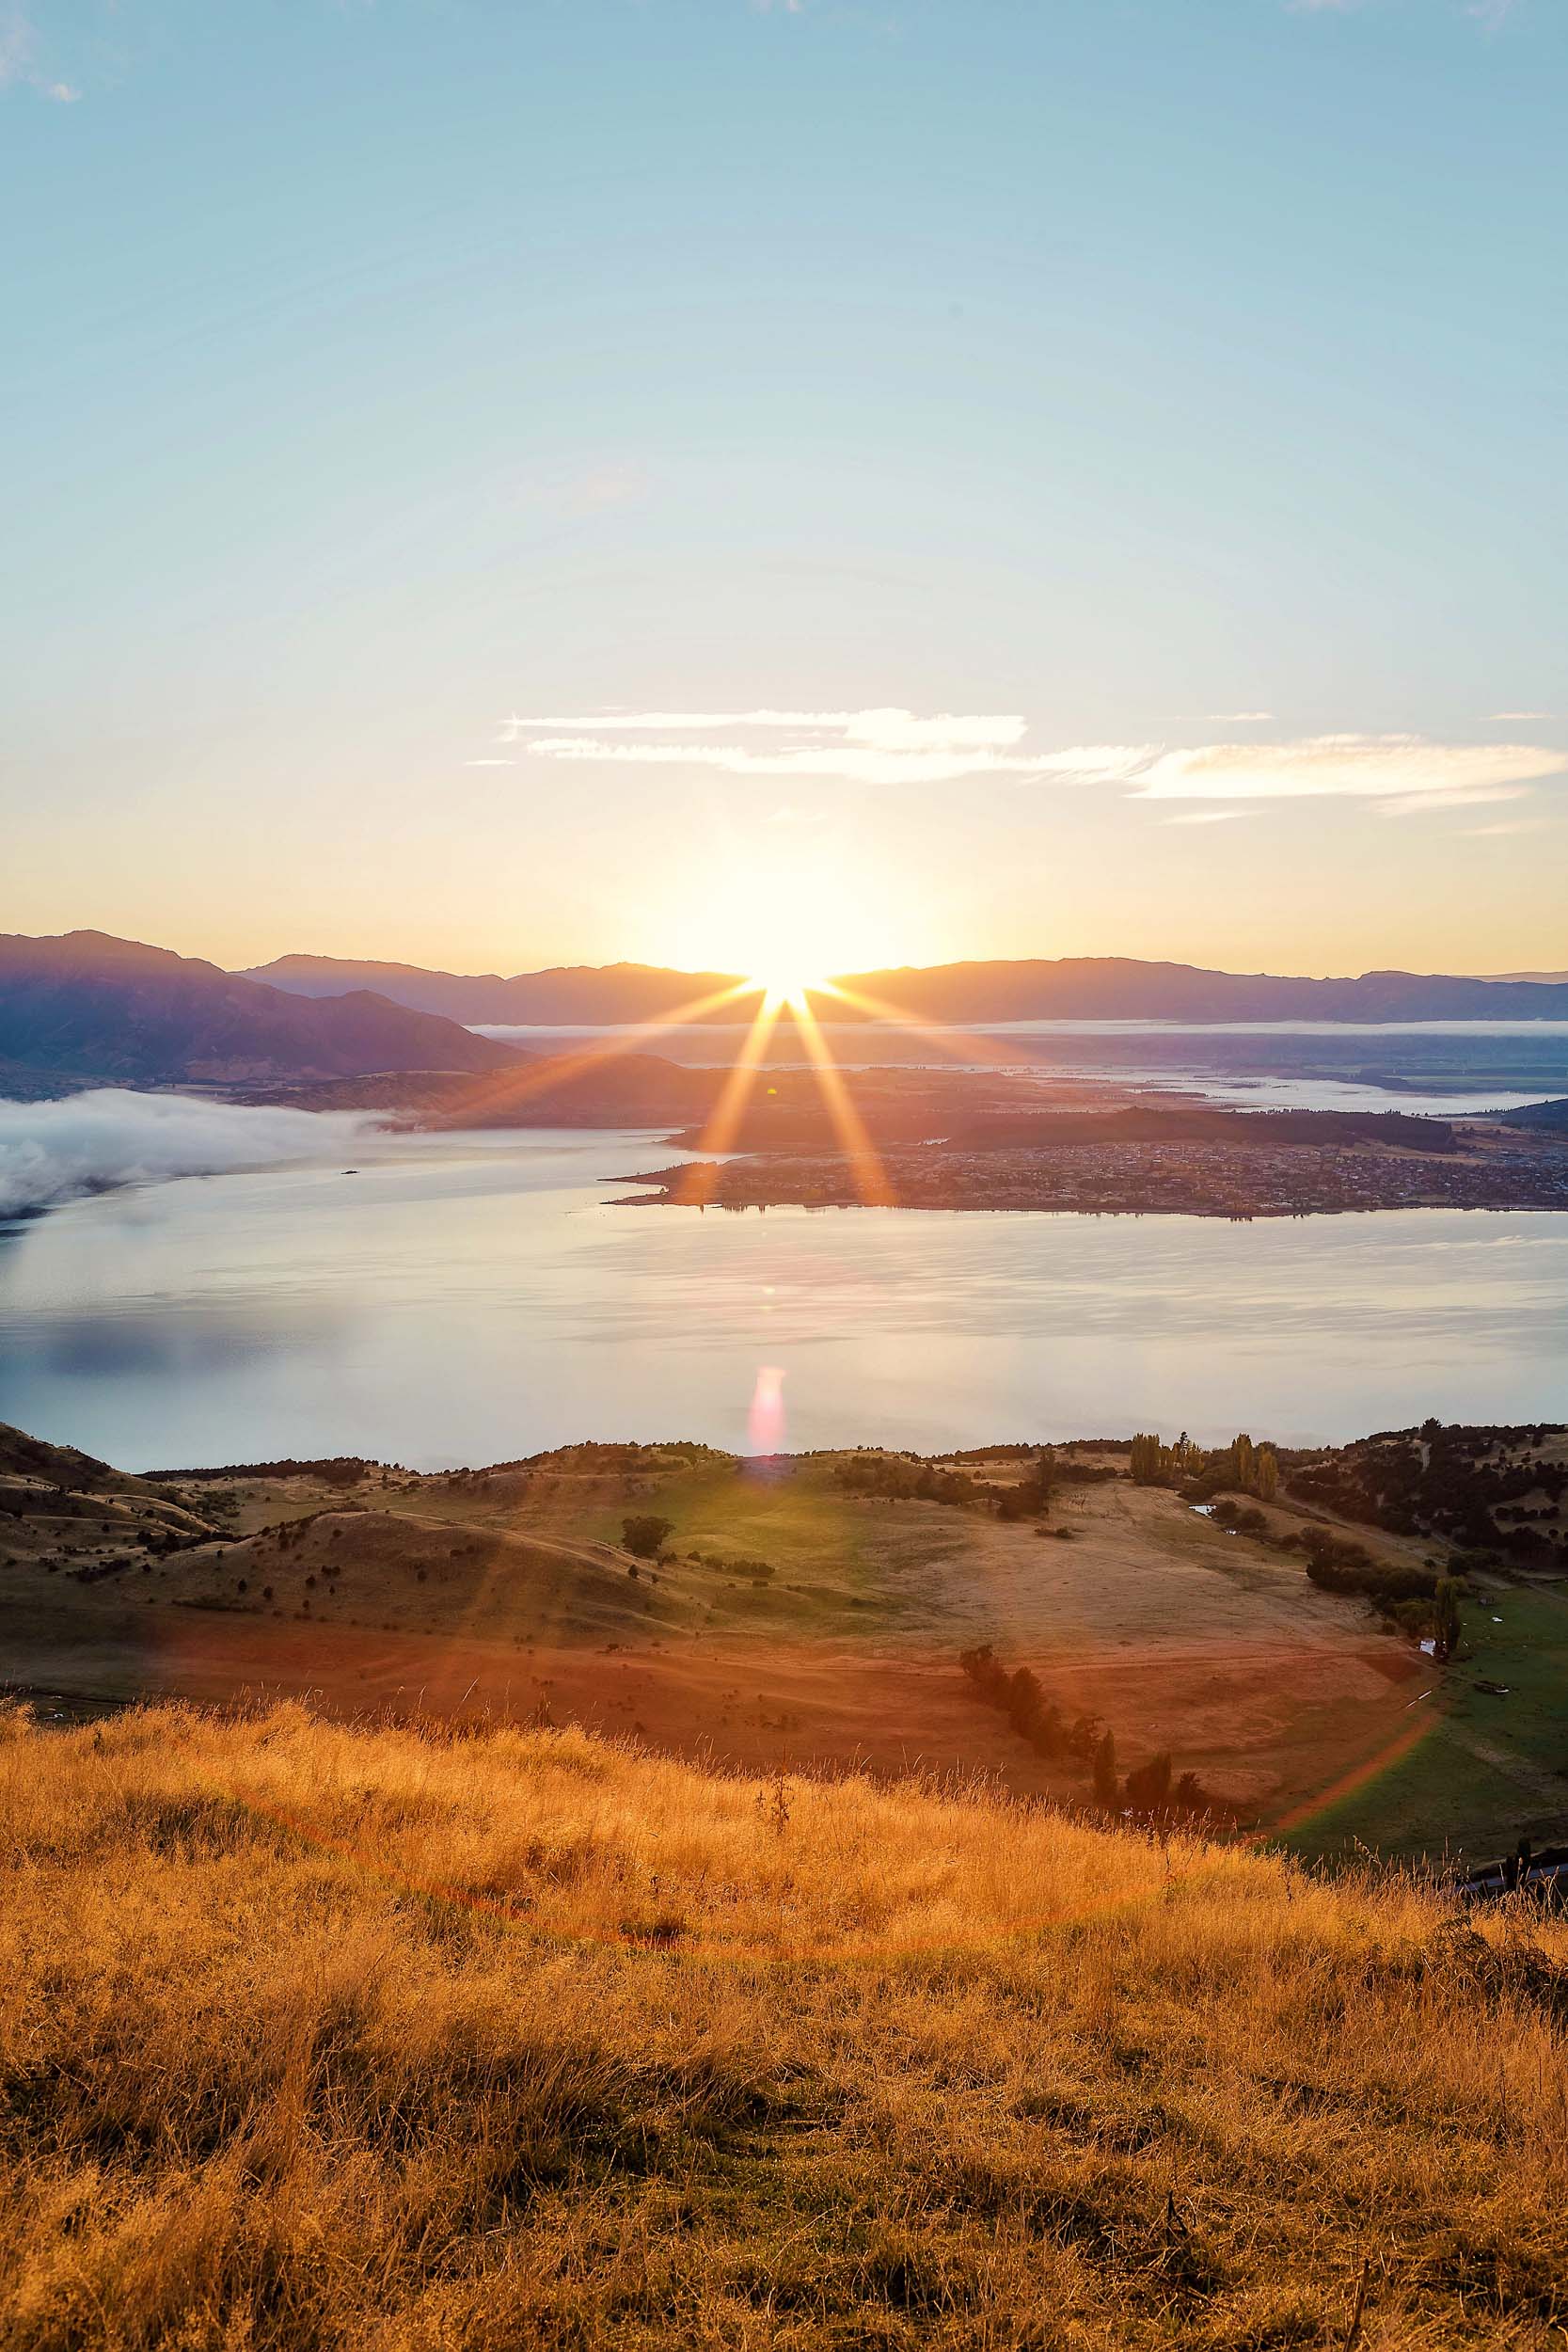 Wanaka, home to Lake Wanaka, is a must see during any New Zealand trip!